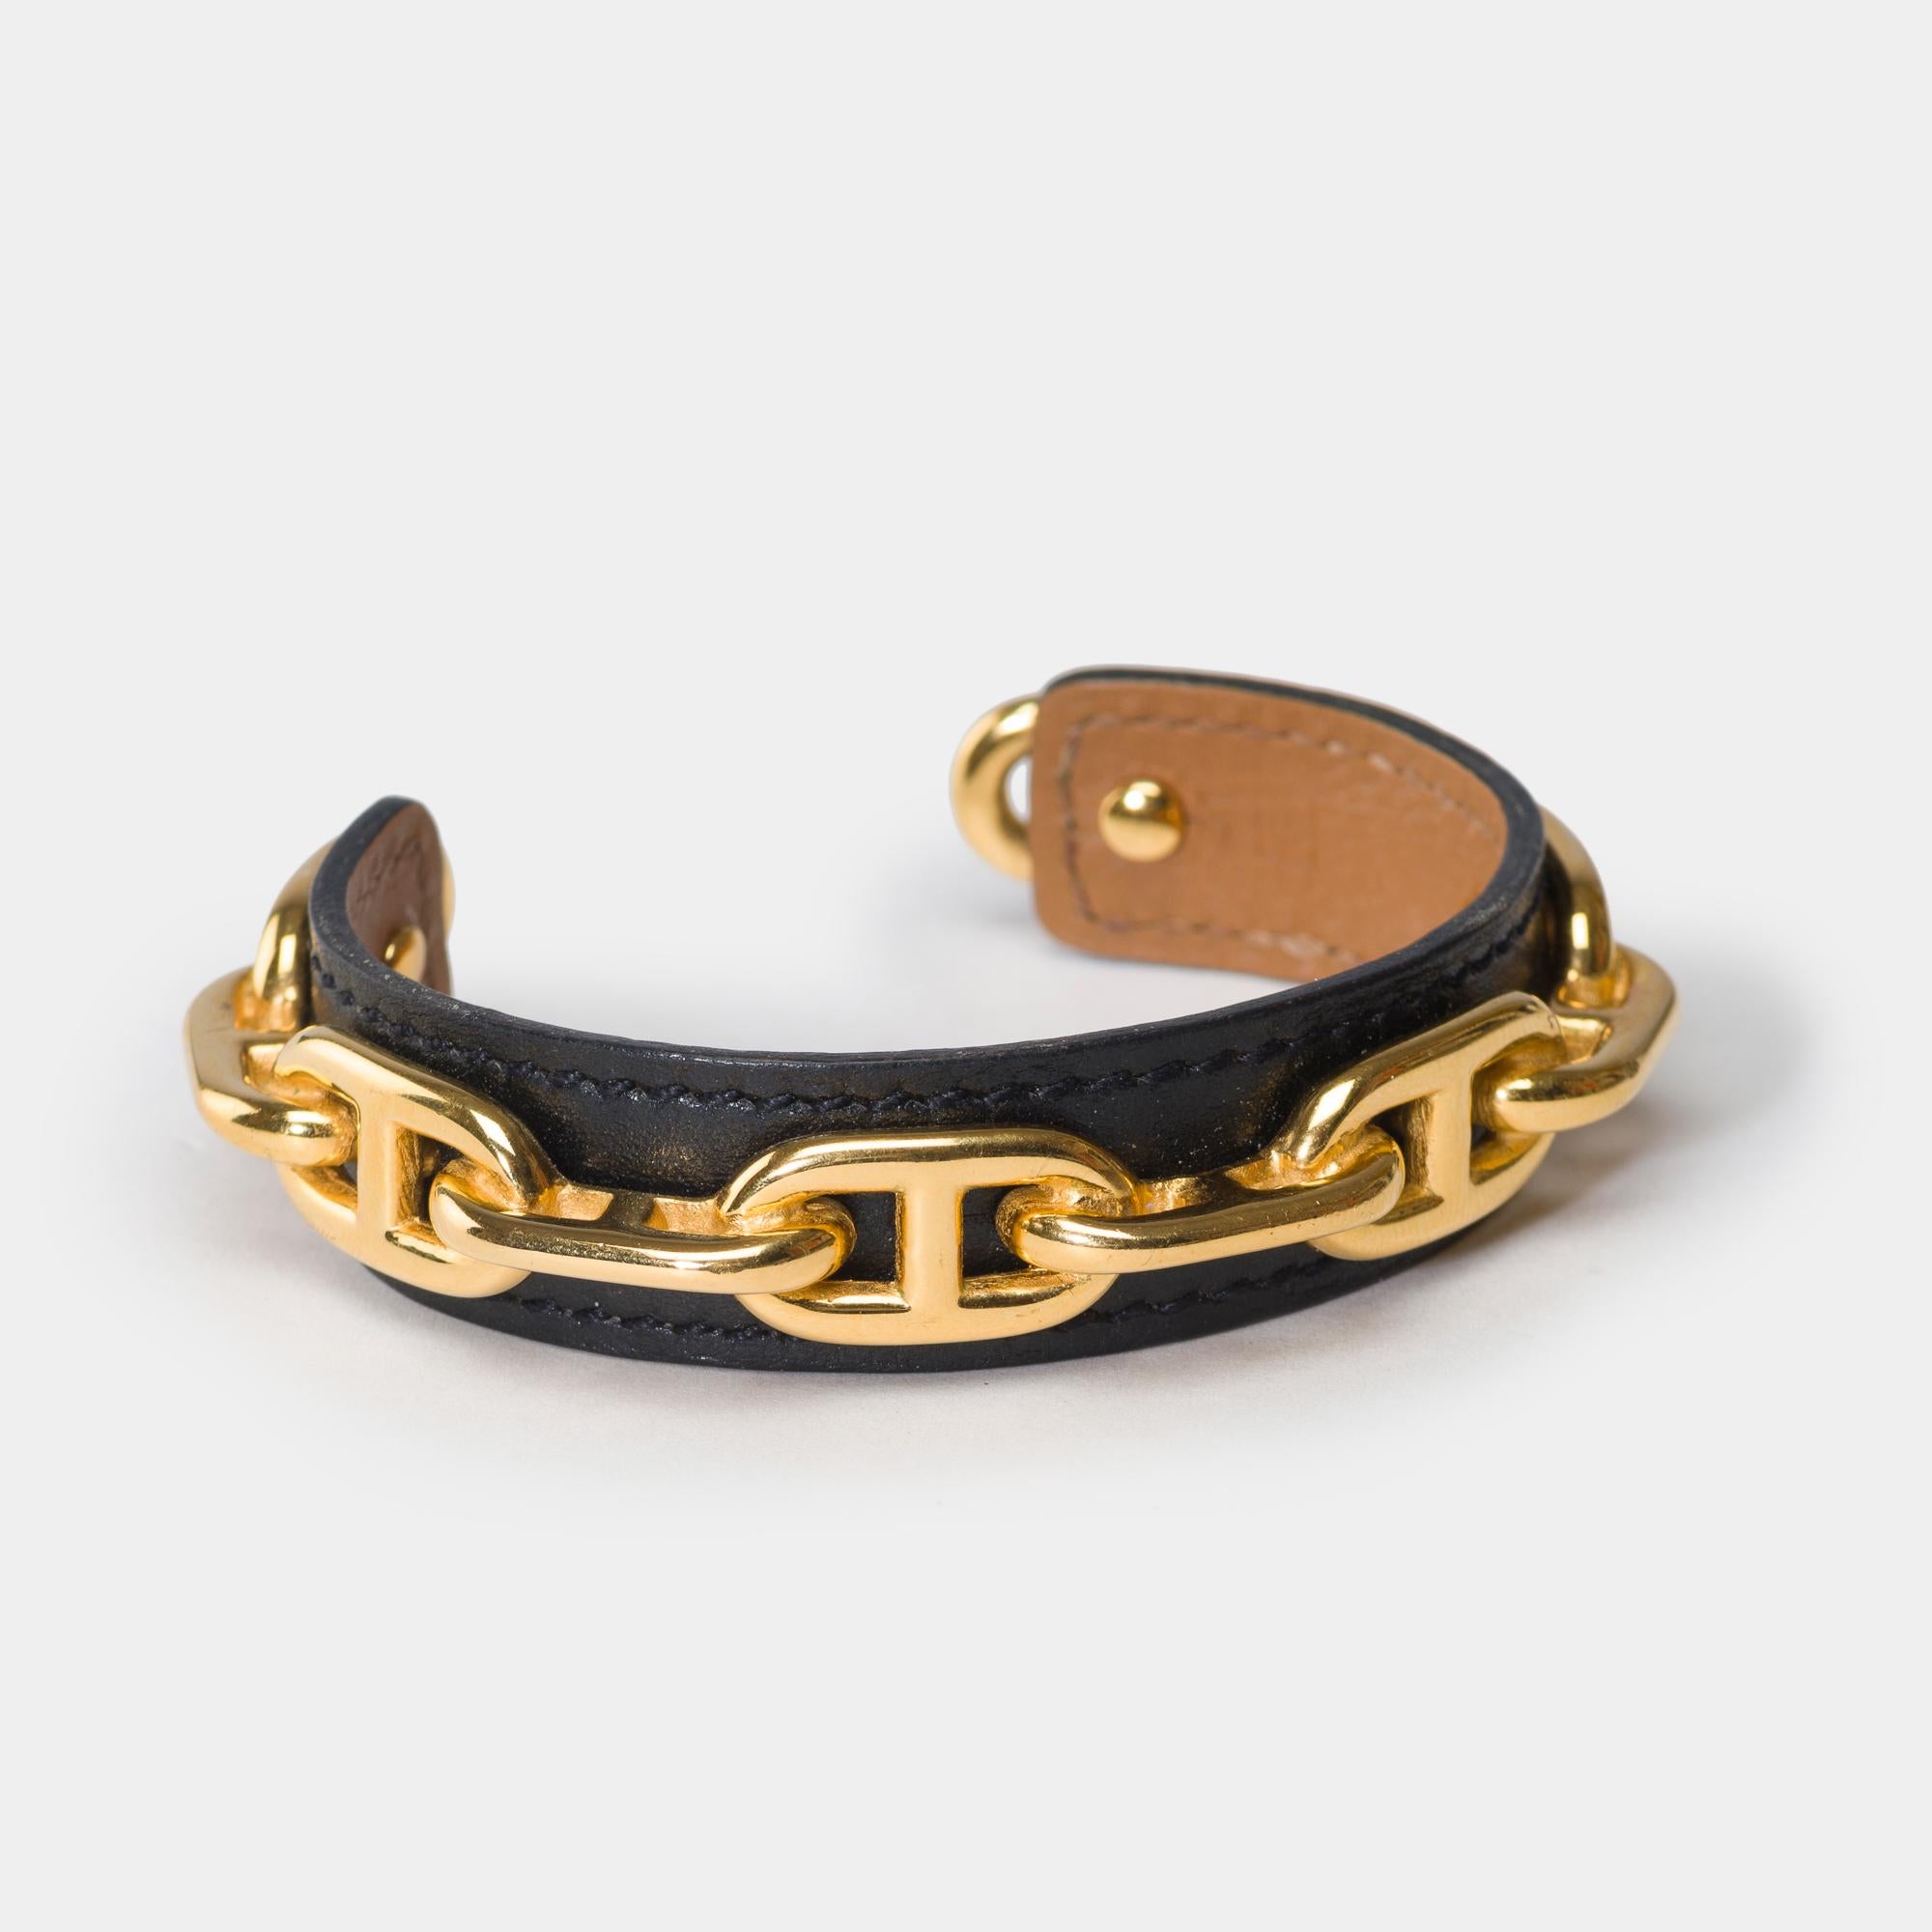 Very​ ​beautiful​ ​Hermès​ ​bracelet​ ​in​ ​black​ ​leather​ ​topped​ ​with​ ​a​ ​golden​ ​metal​ ​chaîne​ ​d'Ancre
Gold​ ​leather​ ​interior
Signature:​ ​